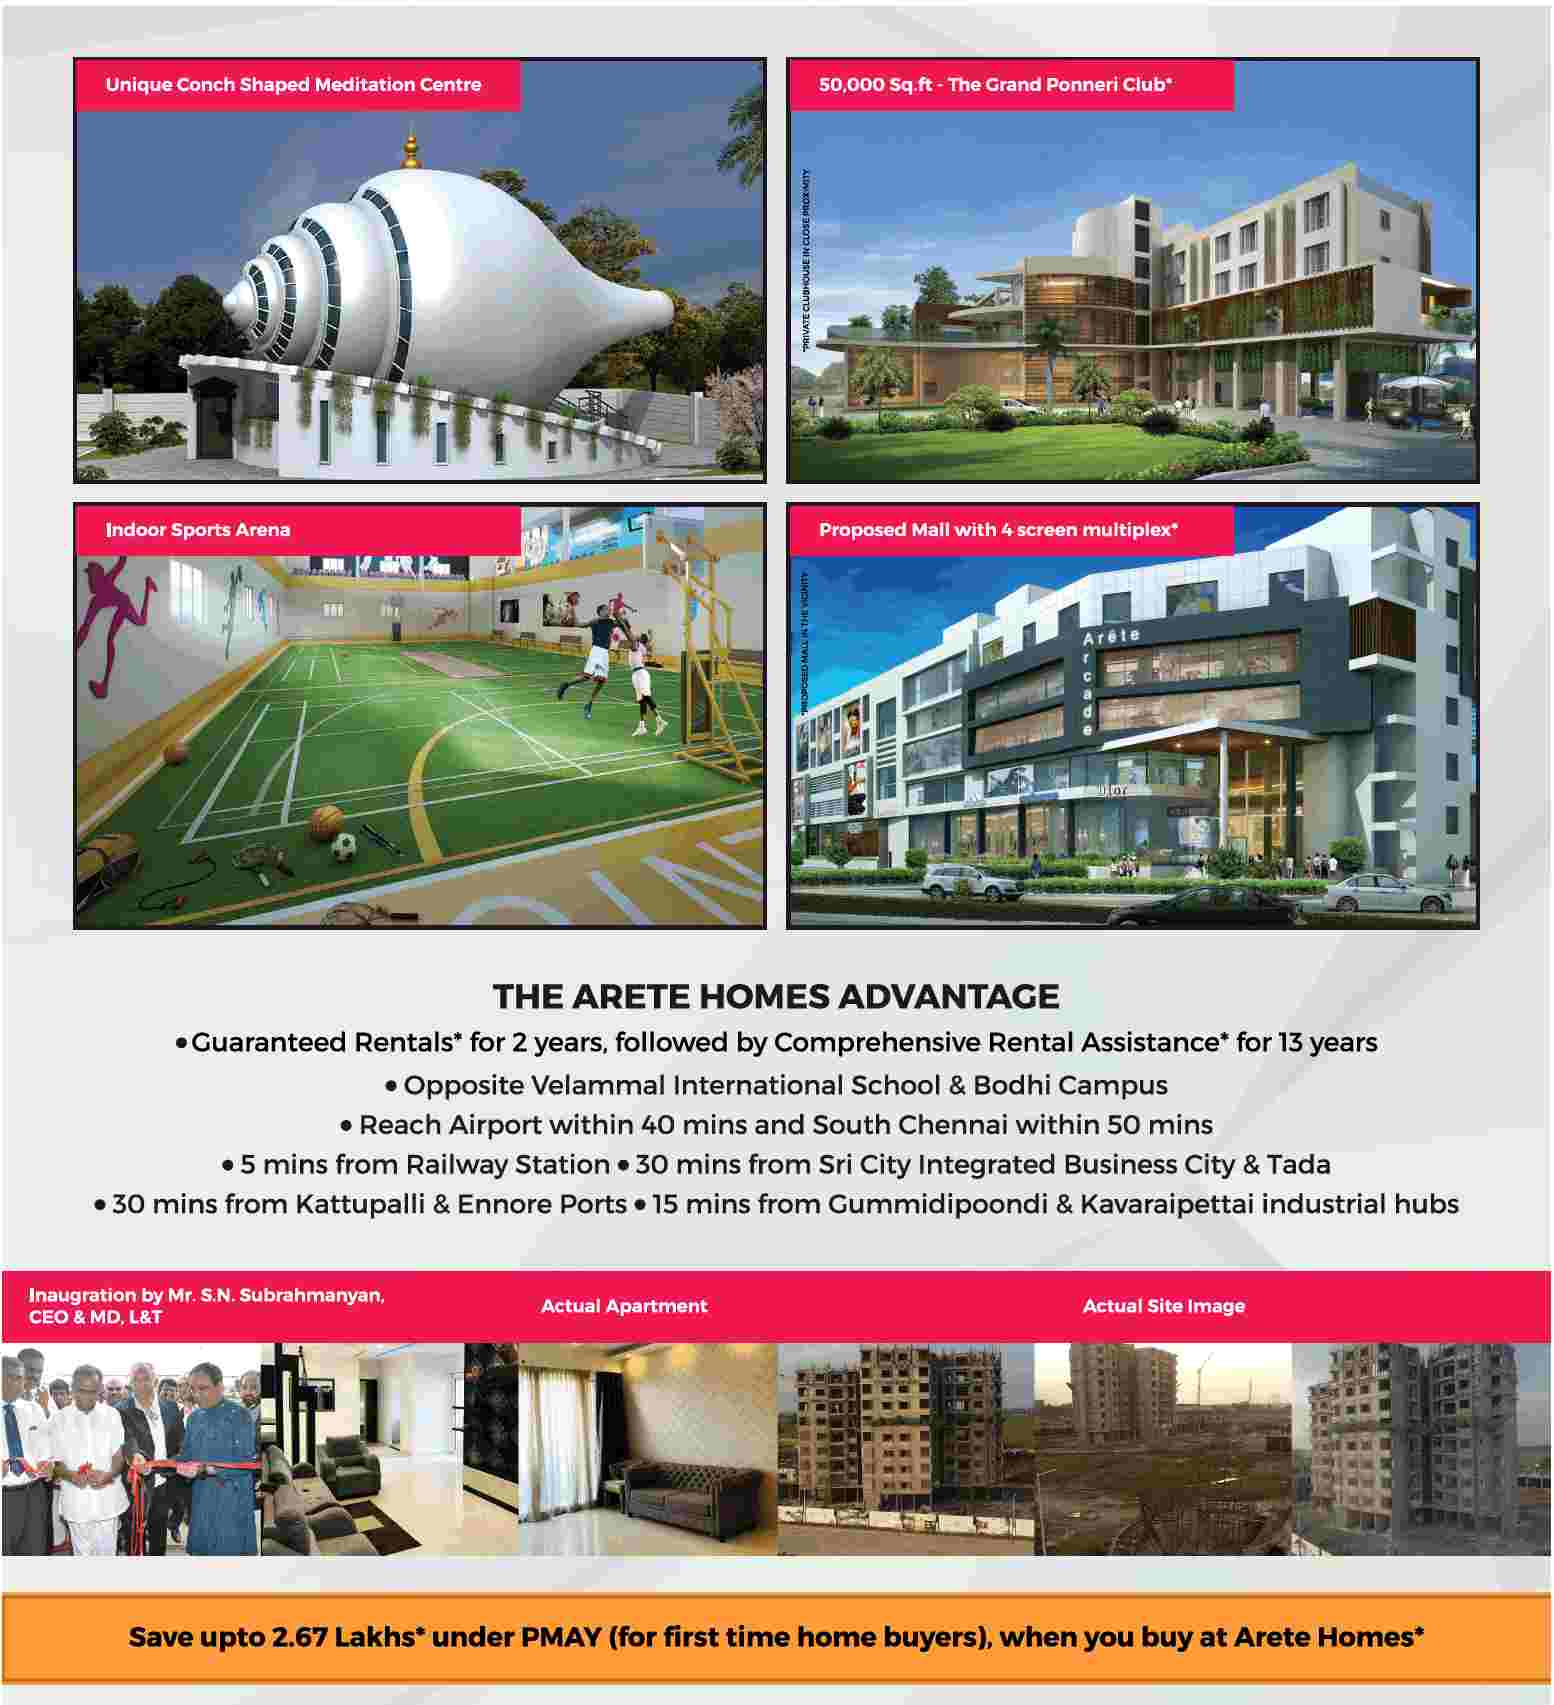 Save upto Rs. 2.67 Lacs when you buy at Prime Arete Homes in Chennai Update